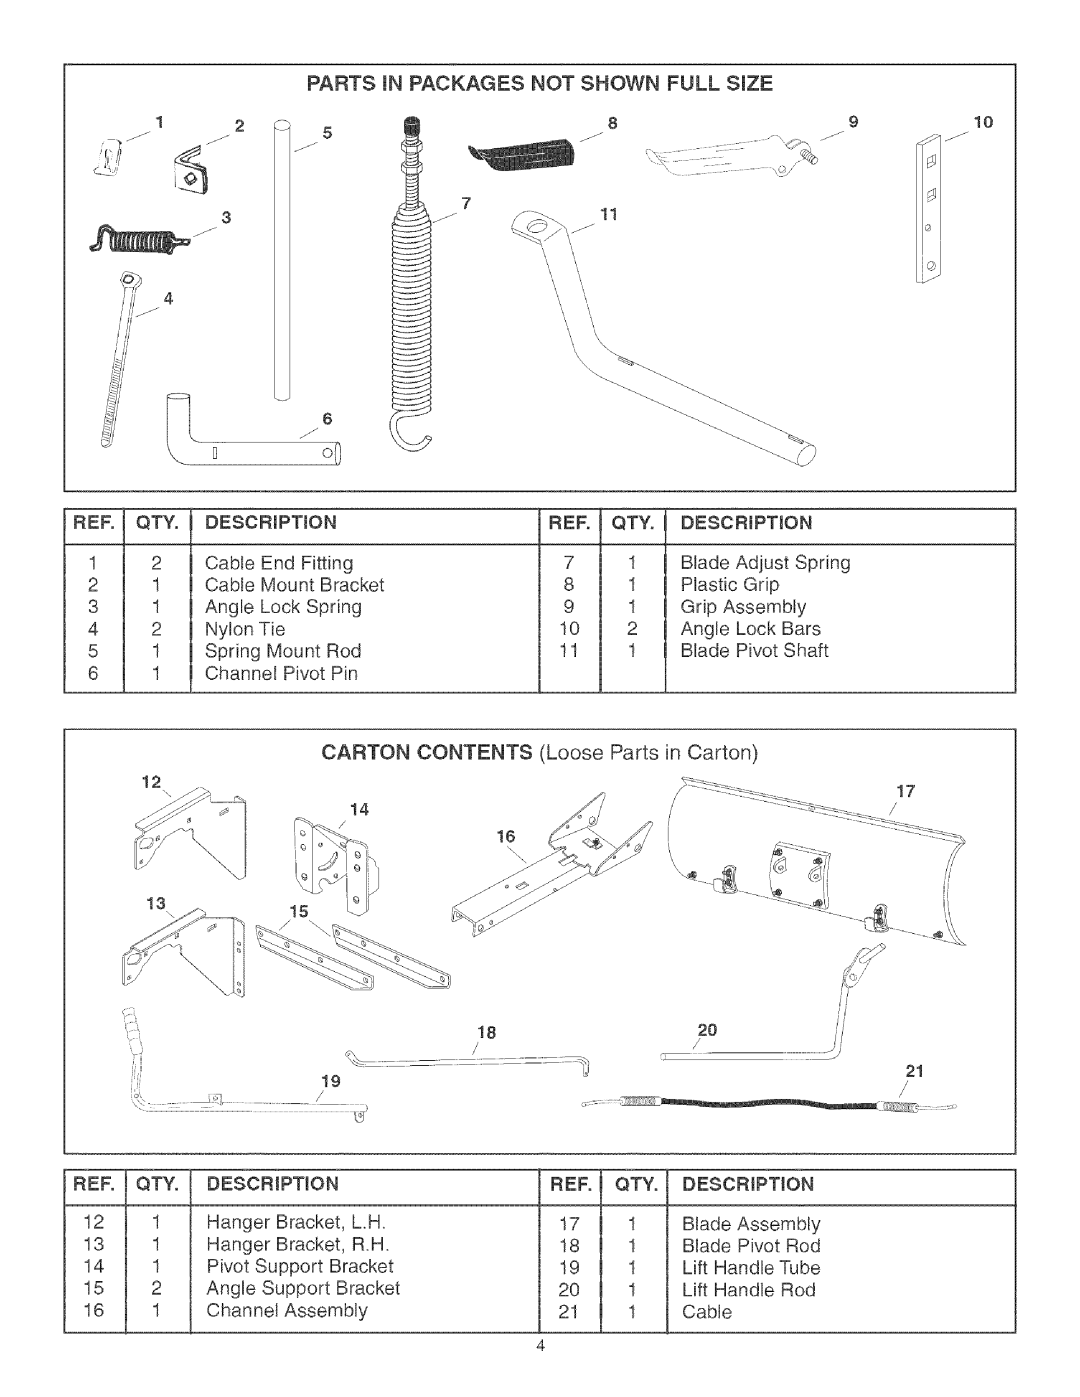 Craftsman 486.24441 operating instructions PARTS iN PACKAGES NOT SHOWN FULL SiZE, CARTON CONTENTS Loose Parts in Carton 